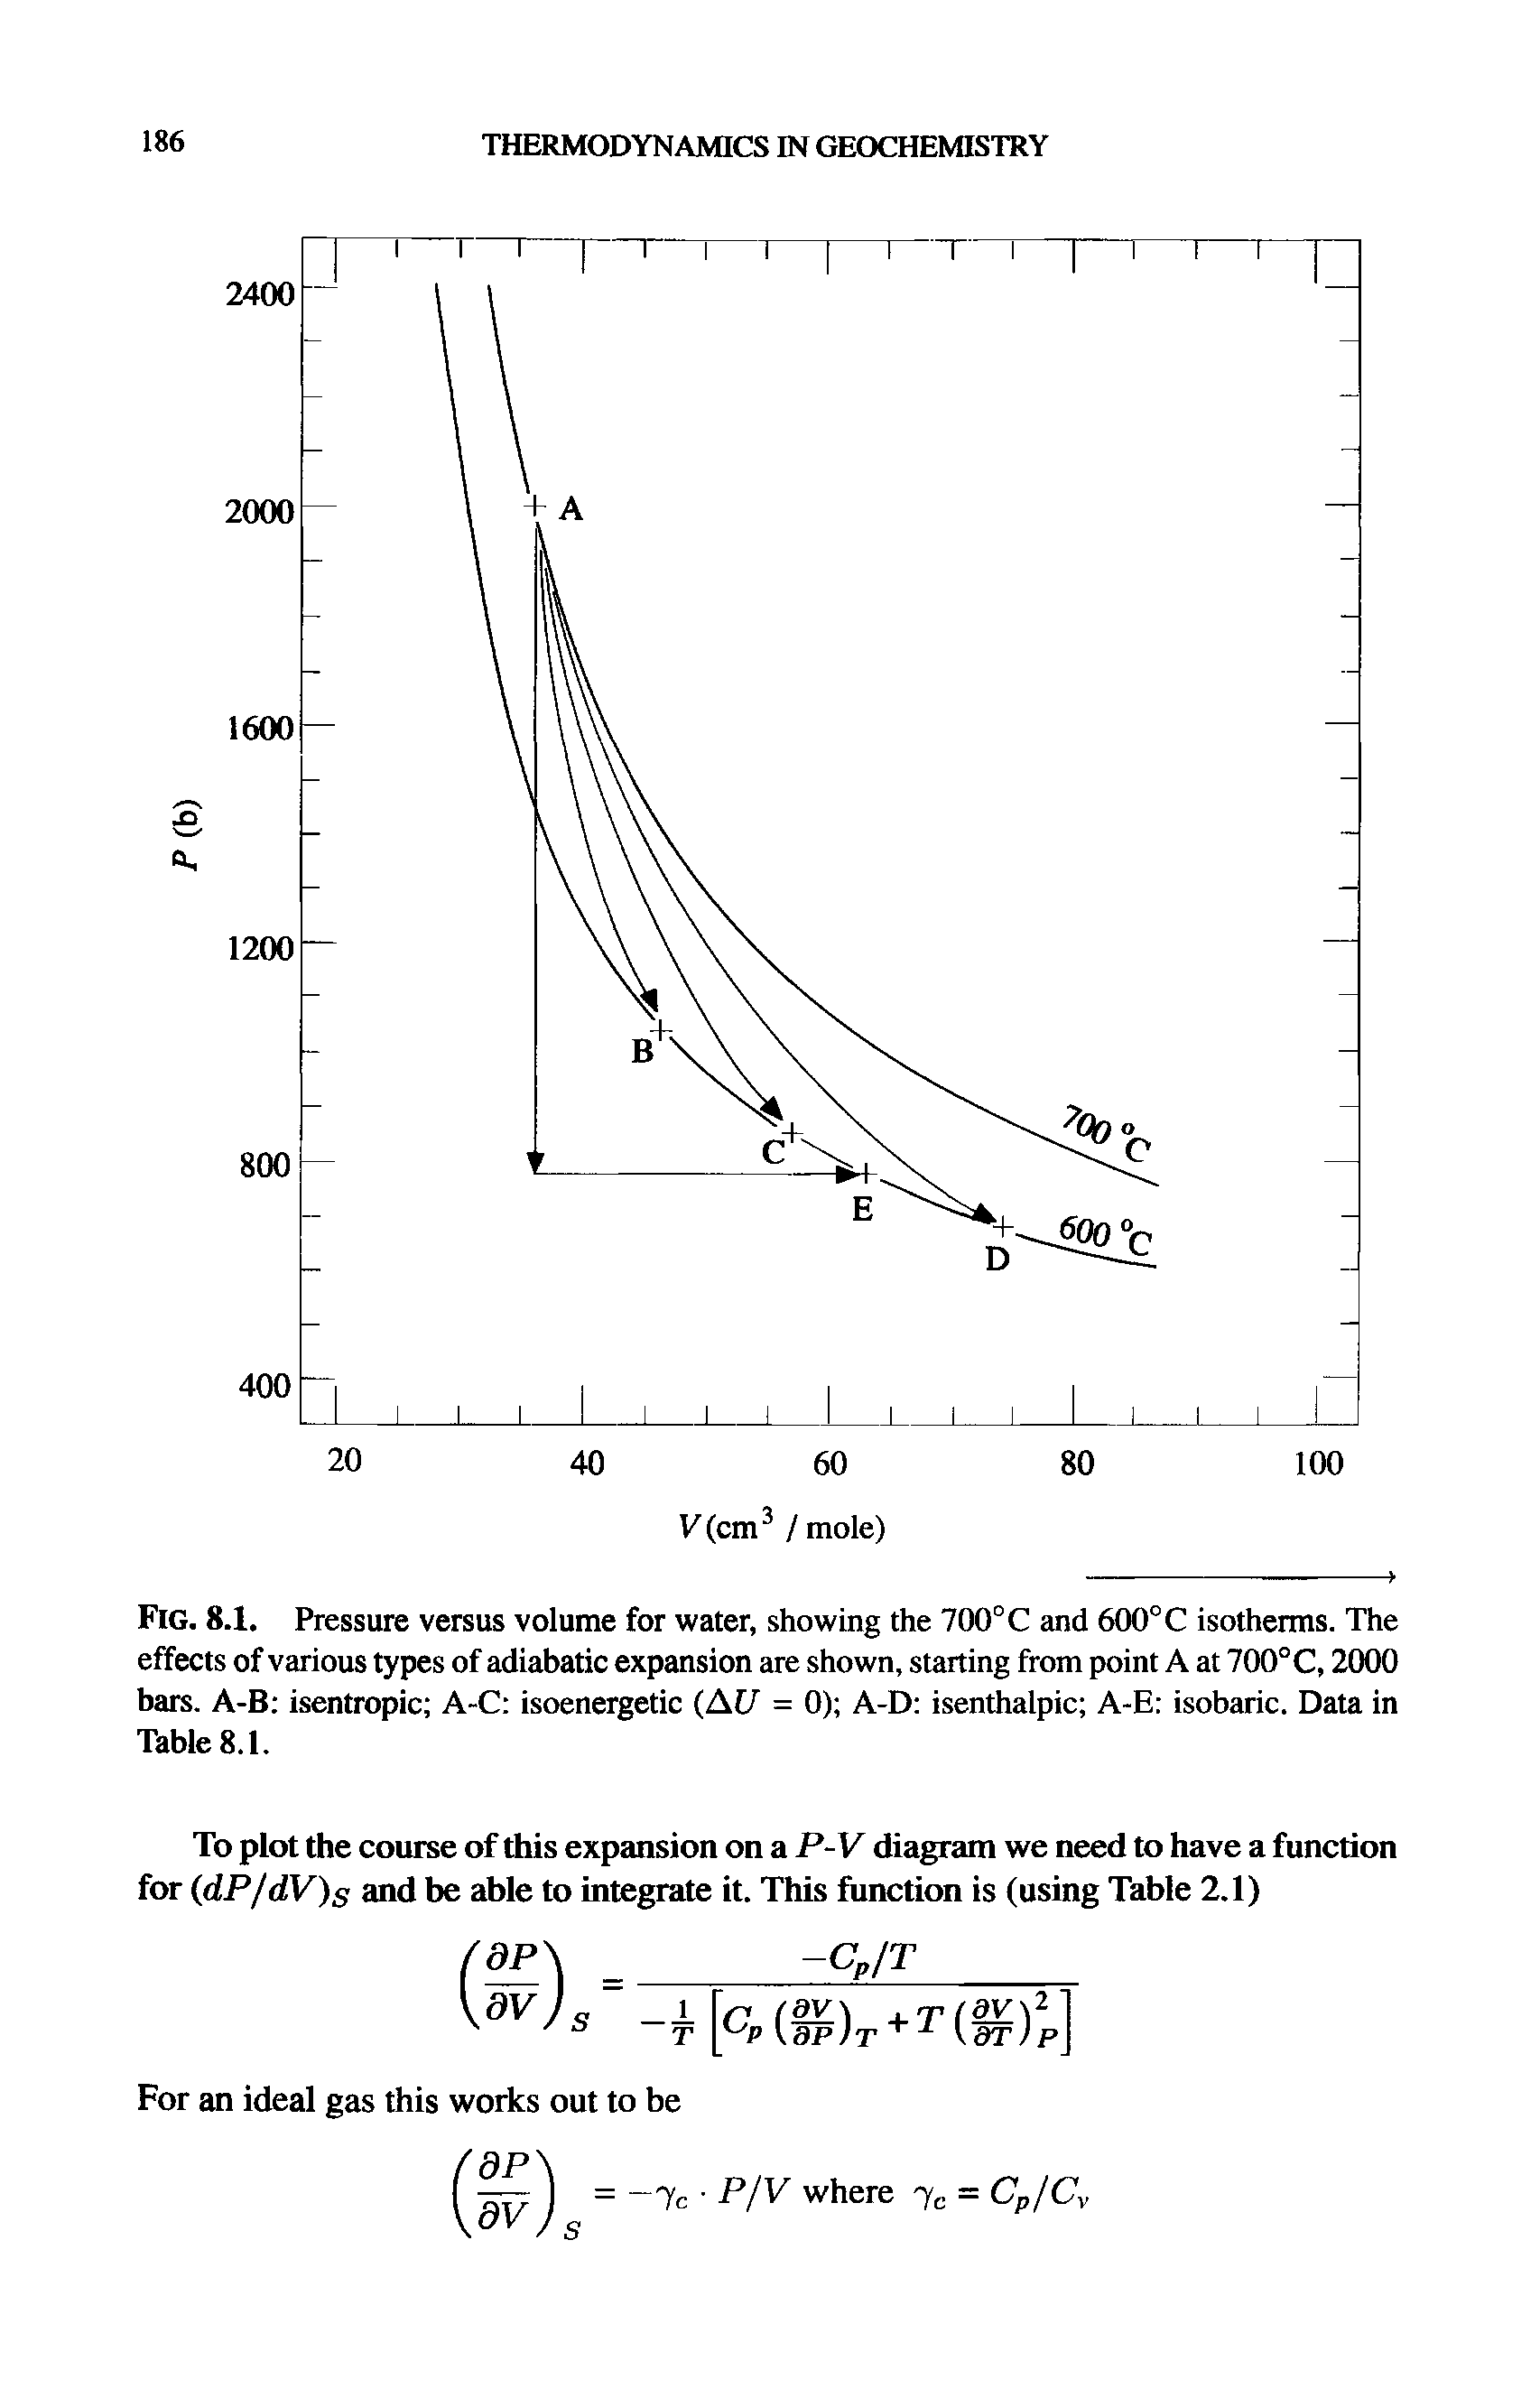 Fig. 8.1, Pressure versus volume for water, showing the 700° C and 600° C isotherms. The effects of various types of adiabatic expansion are shown, starting from point A at 700°C, 2000 bars. A-B isentropic A-C isoenergetic (AC/ = 0) A-D isenthalpic A-E isobaric. Data in Table 8.1.